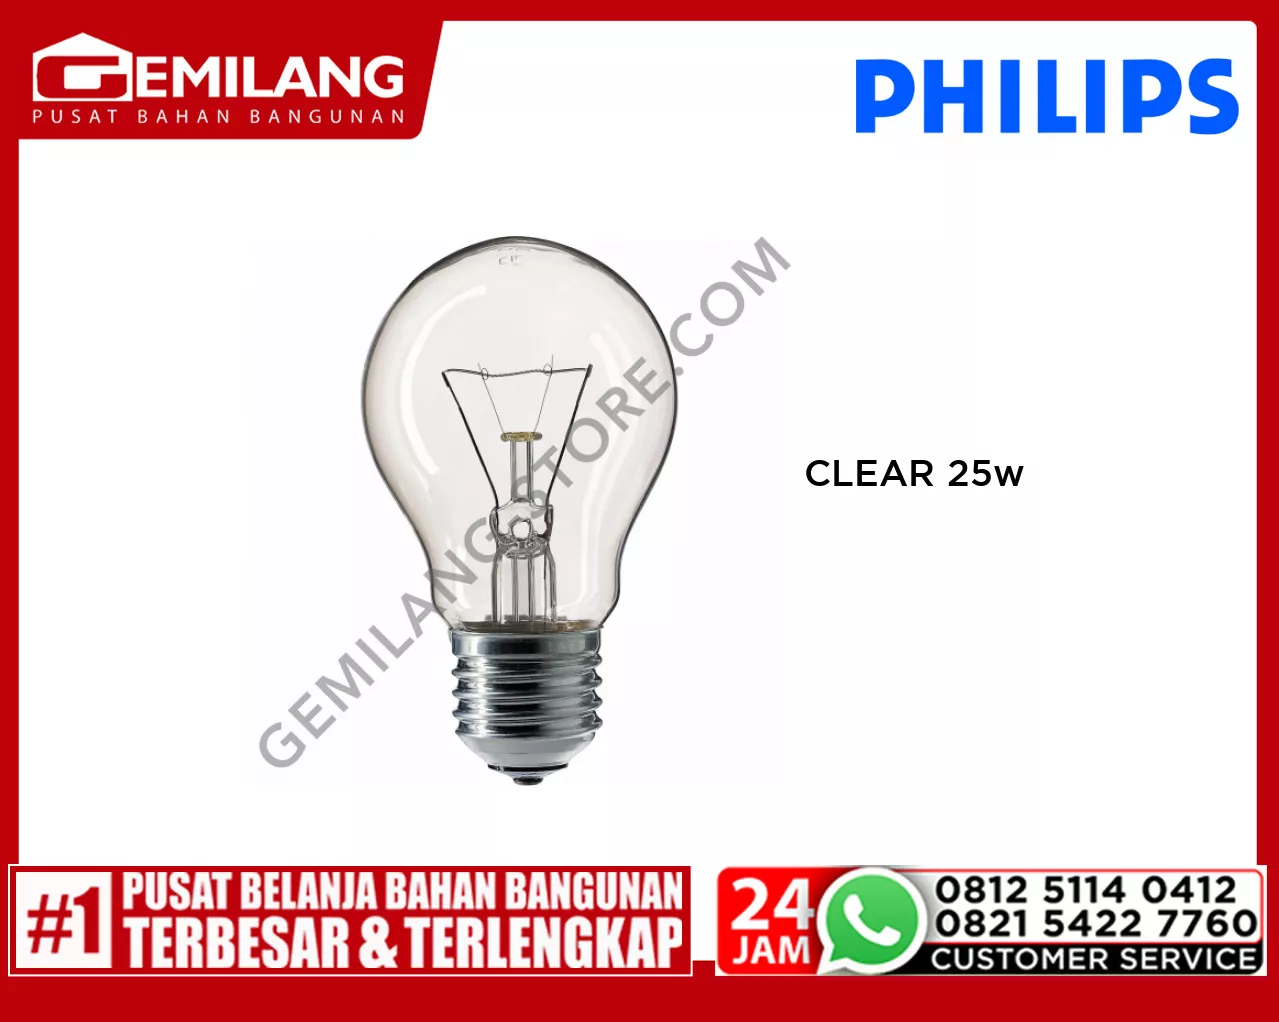 PHILIPS CLEAR 25w